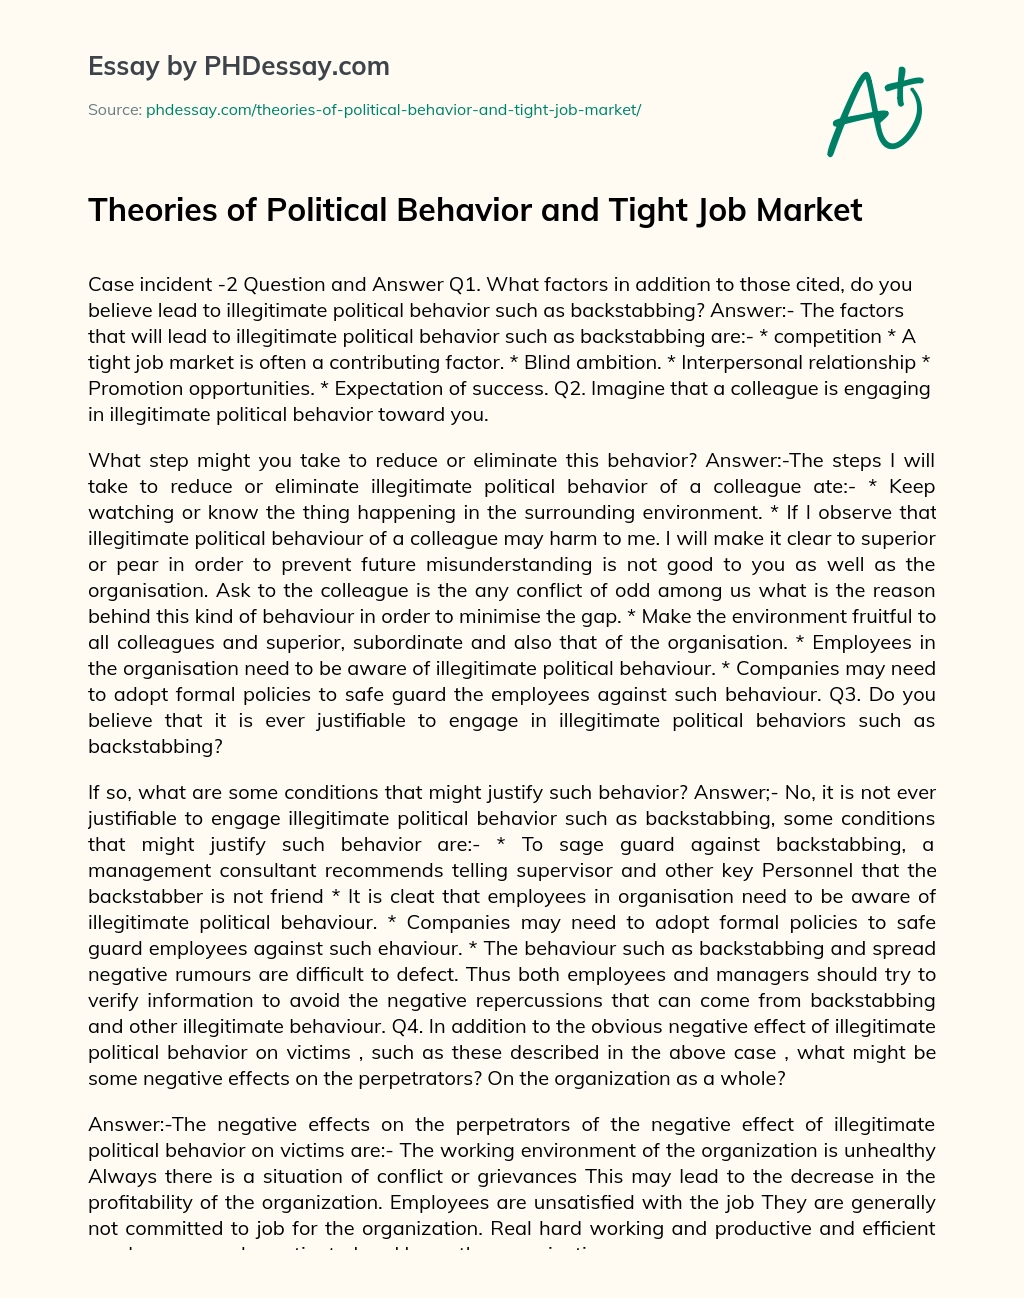 Theories of Political Behavior and Tight Job Market essay